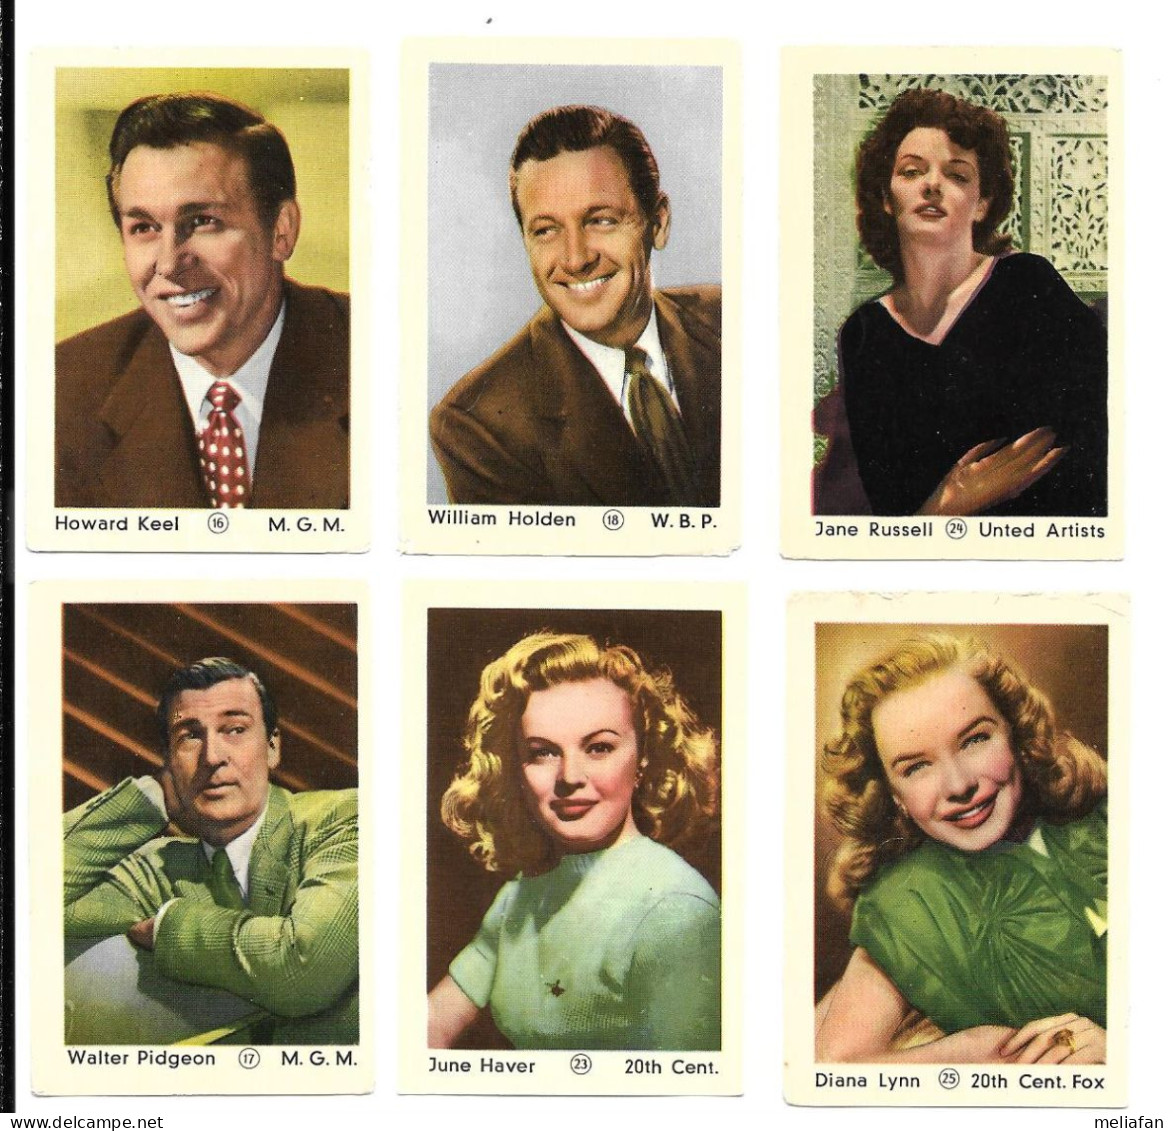 AJ85 - IMAGES DOS VIERGE - WALTER PIDGEON DIANA LYNN JUNE HAVER JANE RUSSELL HOWARD KEEL WILLIAM HOLDEN - Photographs